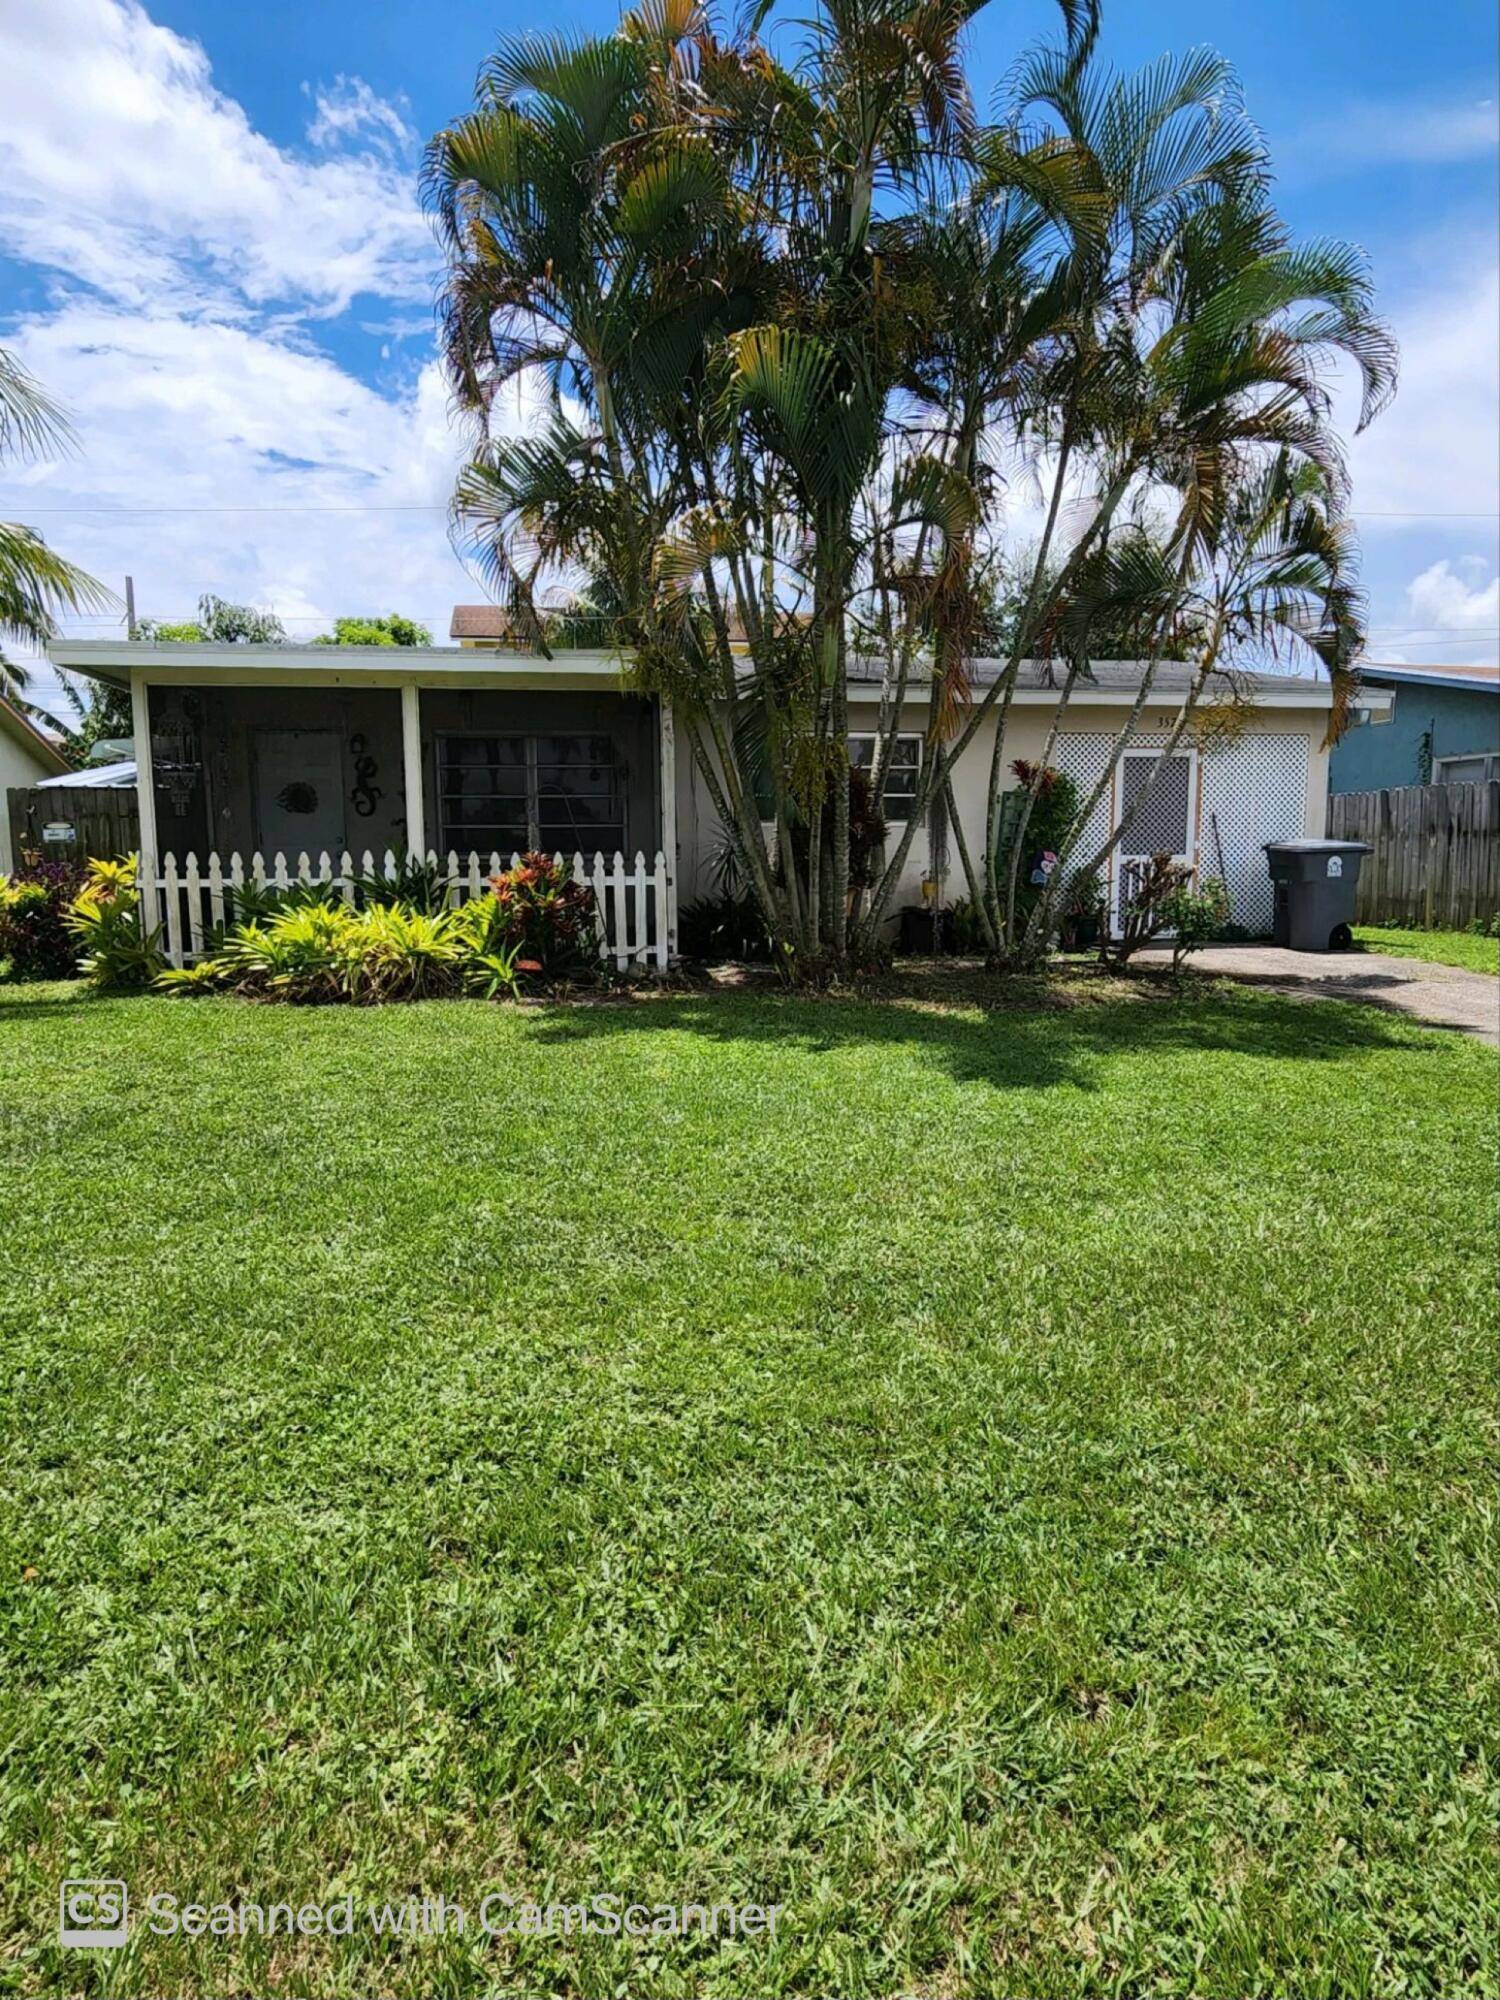 ABSOLUTELY CHARMING 2 BEDROOM FLORIDA STYLE SINGLE FAMILY HOME WITH CARPORT THAT HAS BEEN ENCLOSED BUT CAN EASILY BE REVERTED BACK LOCATED BEHIND THE BOYNTON MALL IN A NICE QUIET ...